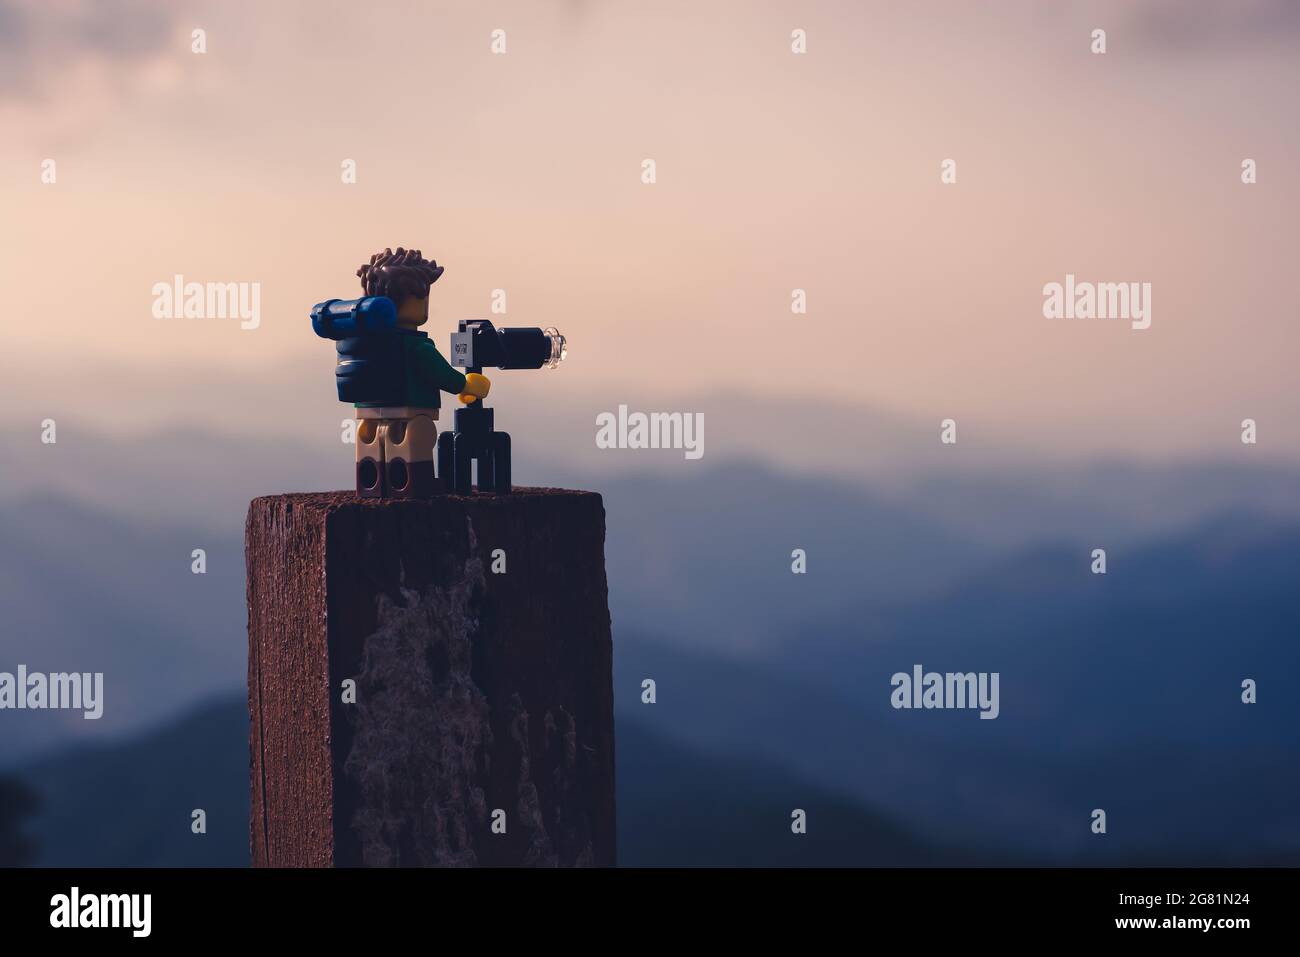 Silhouette of nature photographer taking photos at sunset in the foggy mountains. Illustrative editorial. July 15, 2021 Stock Photo